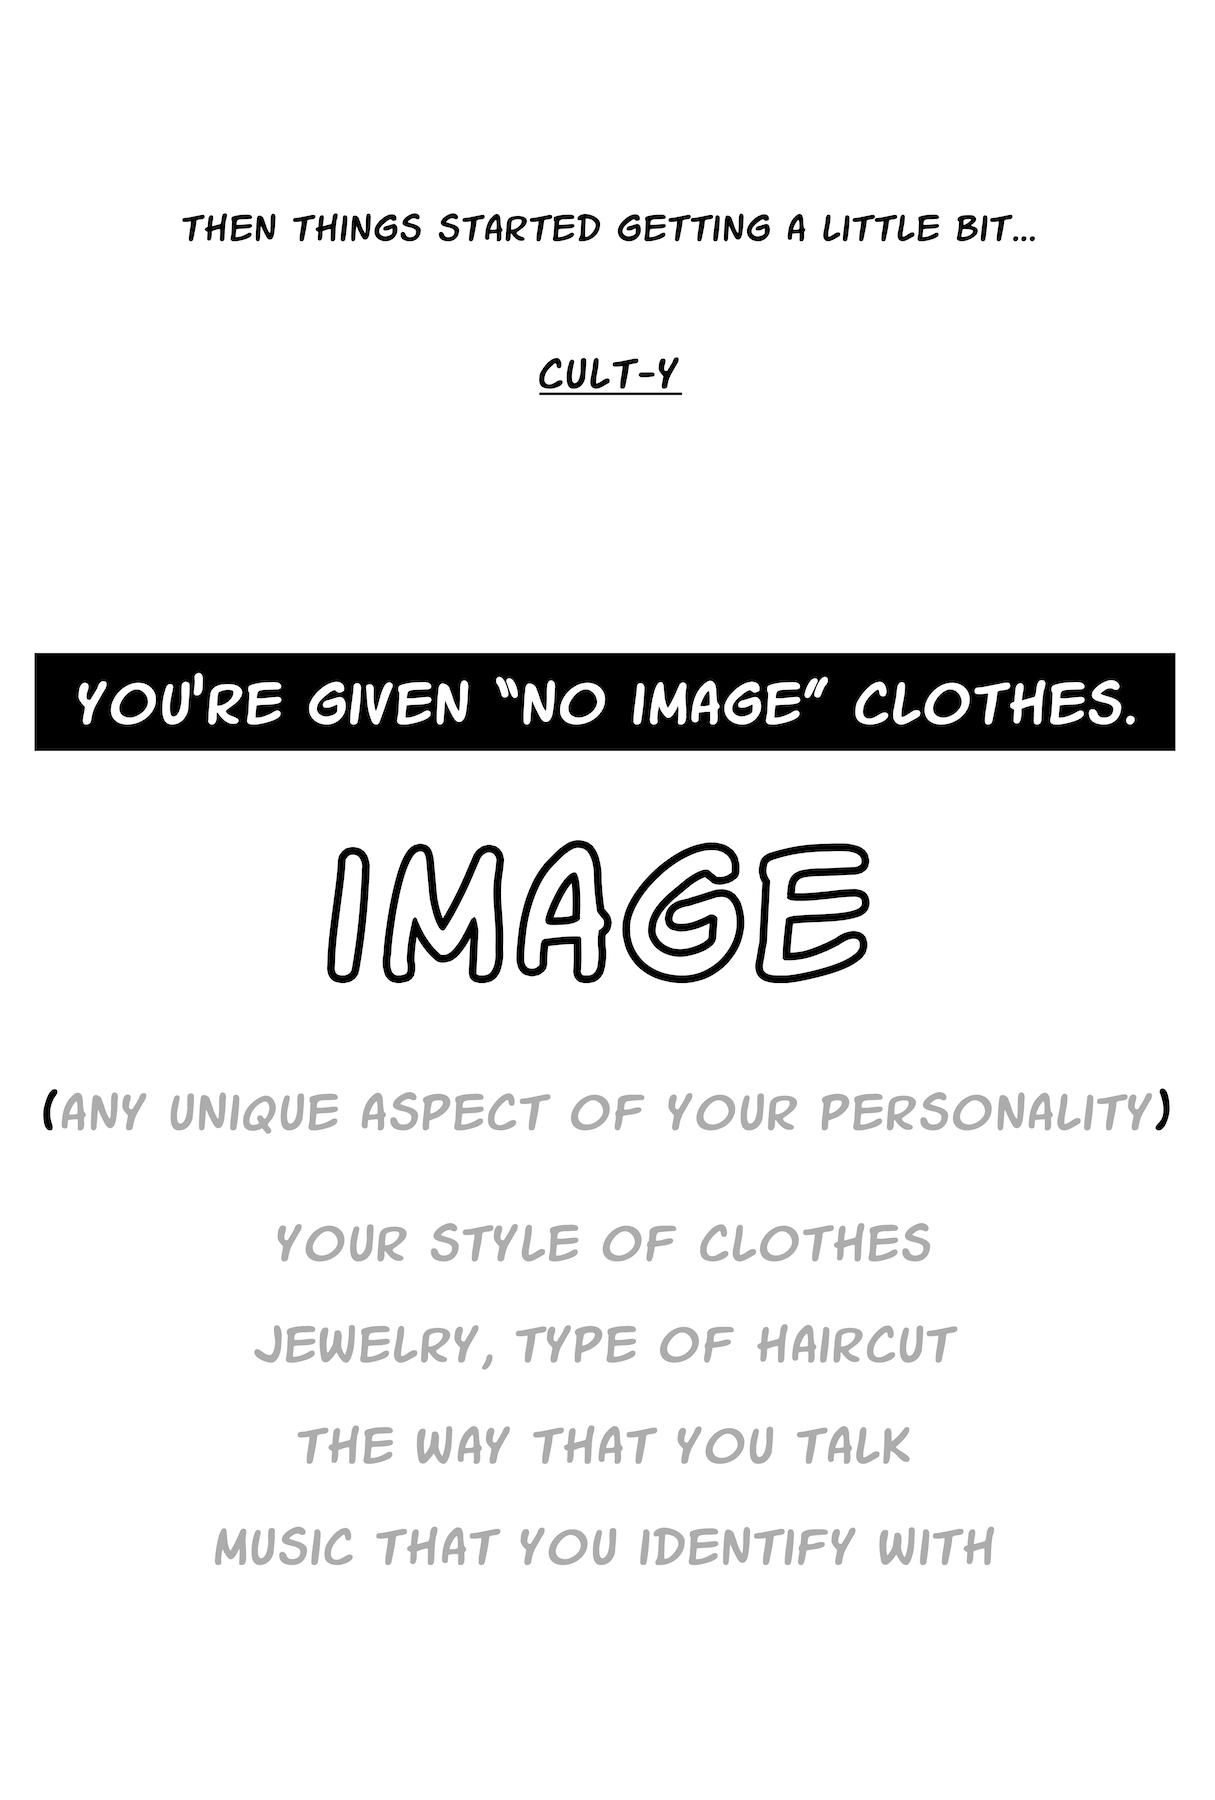  you’re given “no image” clothes., image, (any unique aspect of your personality), your style of clothes jewelry, type of haircut the way that you talk music that you identify with , then things started getting a little bit... cult-y,